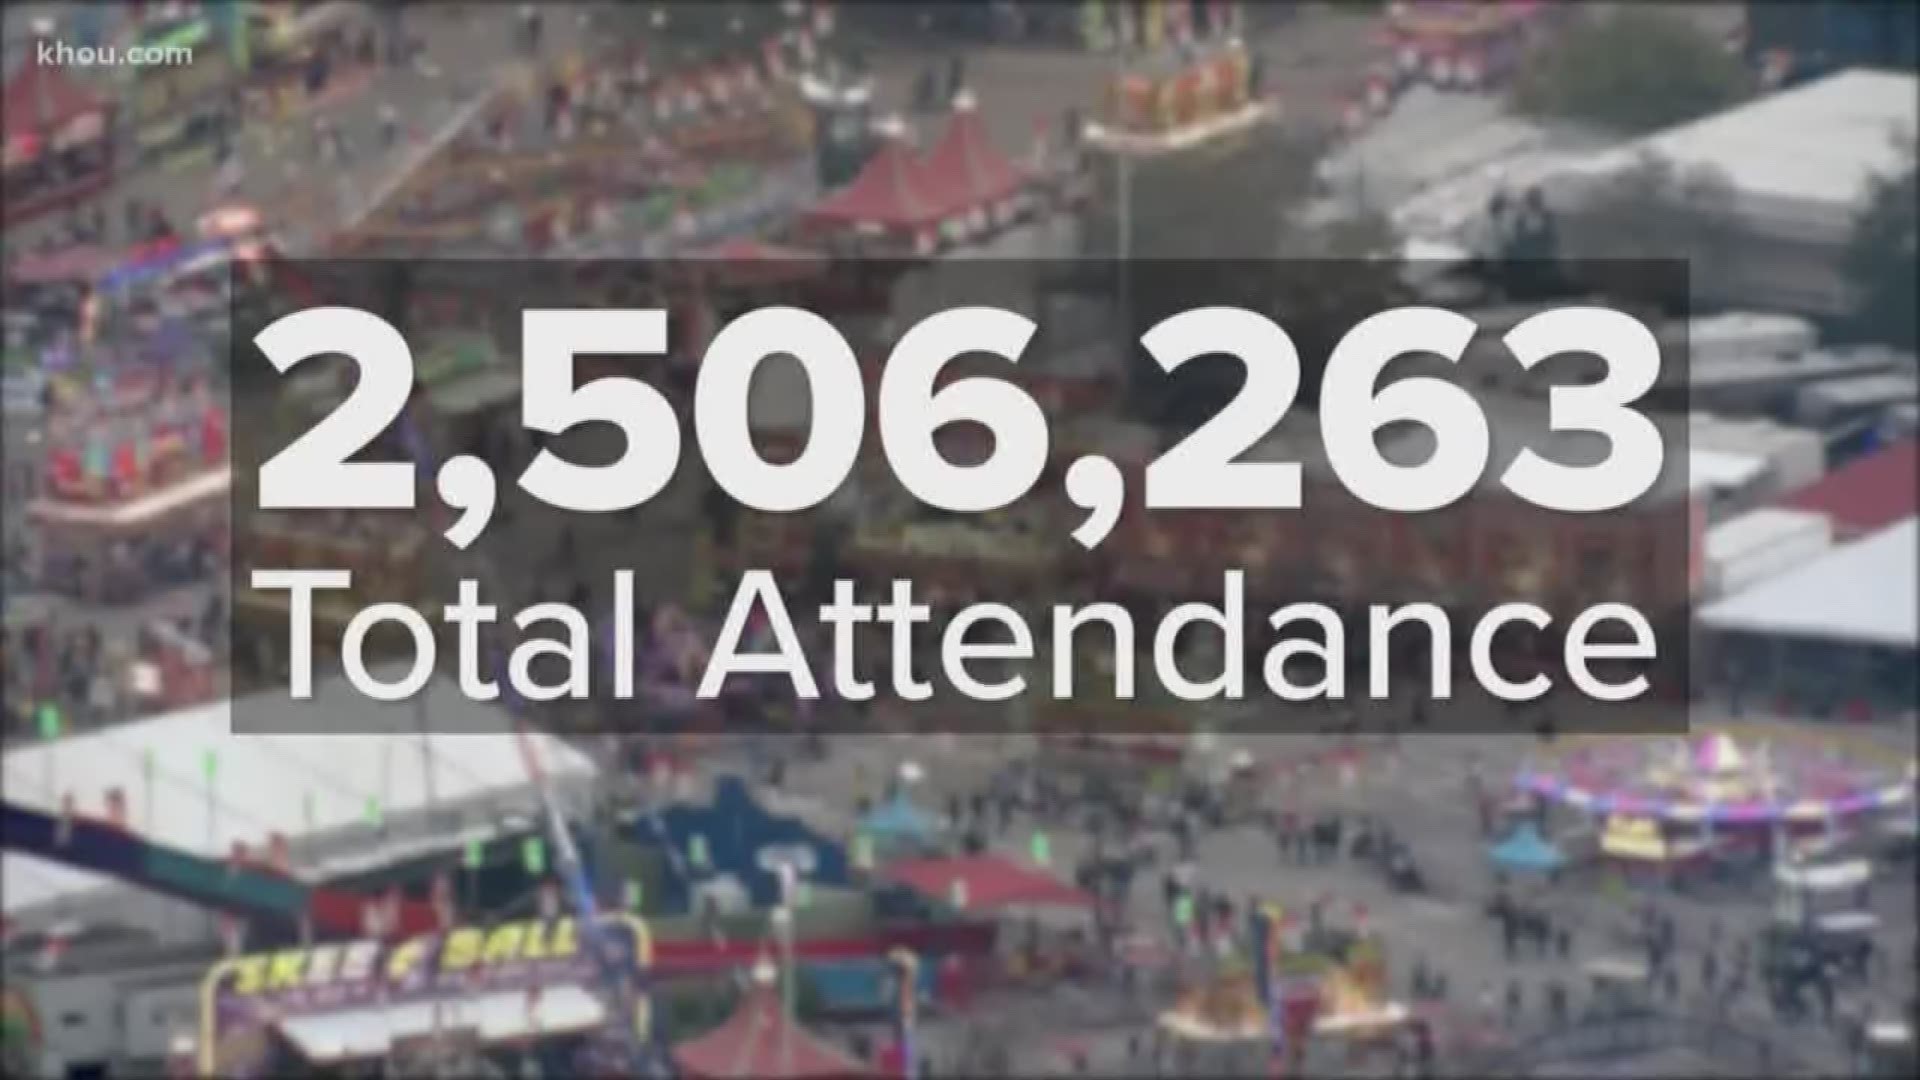 From the food to the concerts and the auctions, this year's rodeo was one for the record books.